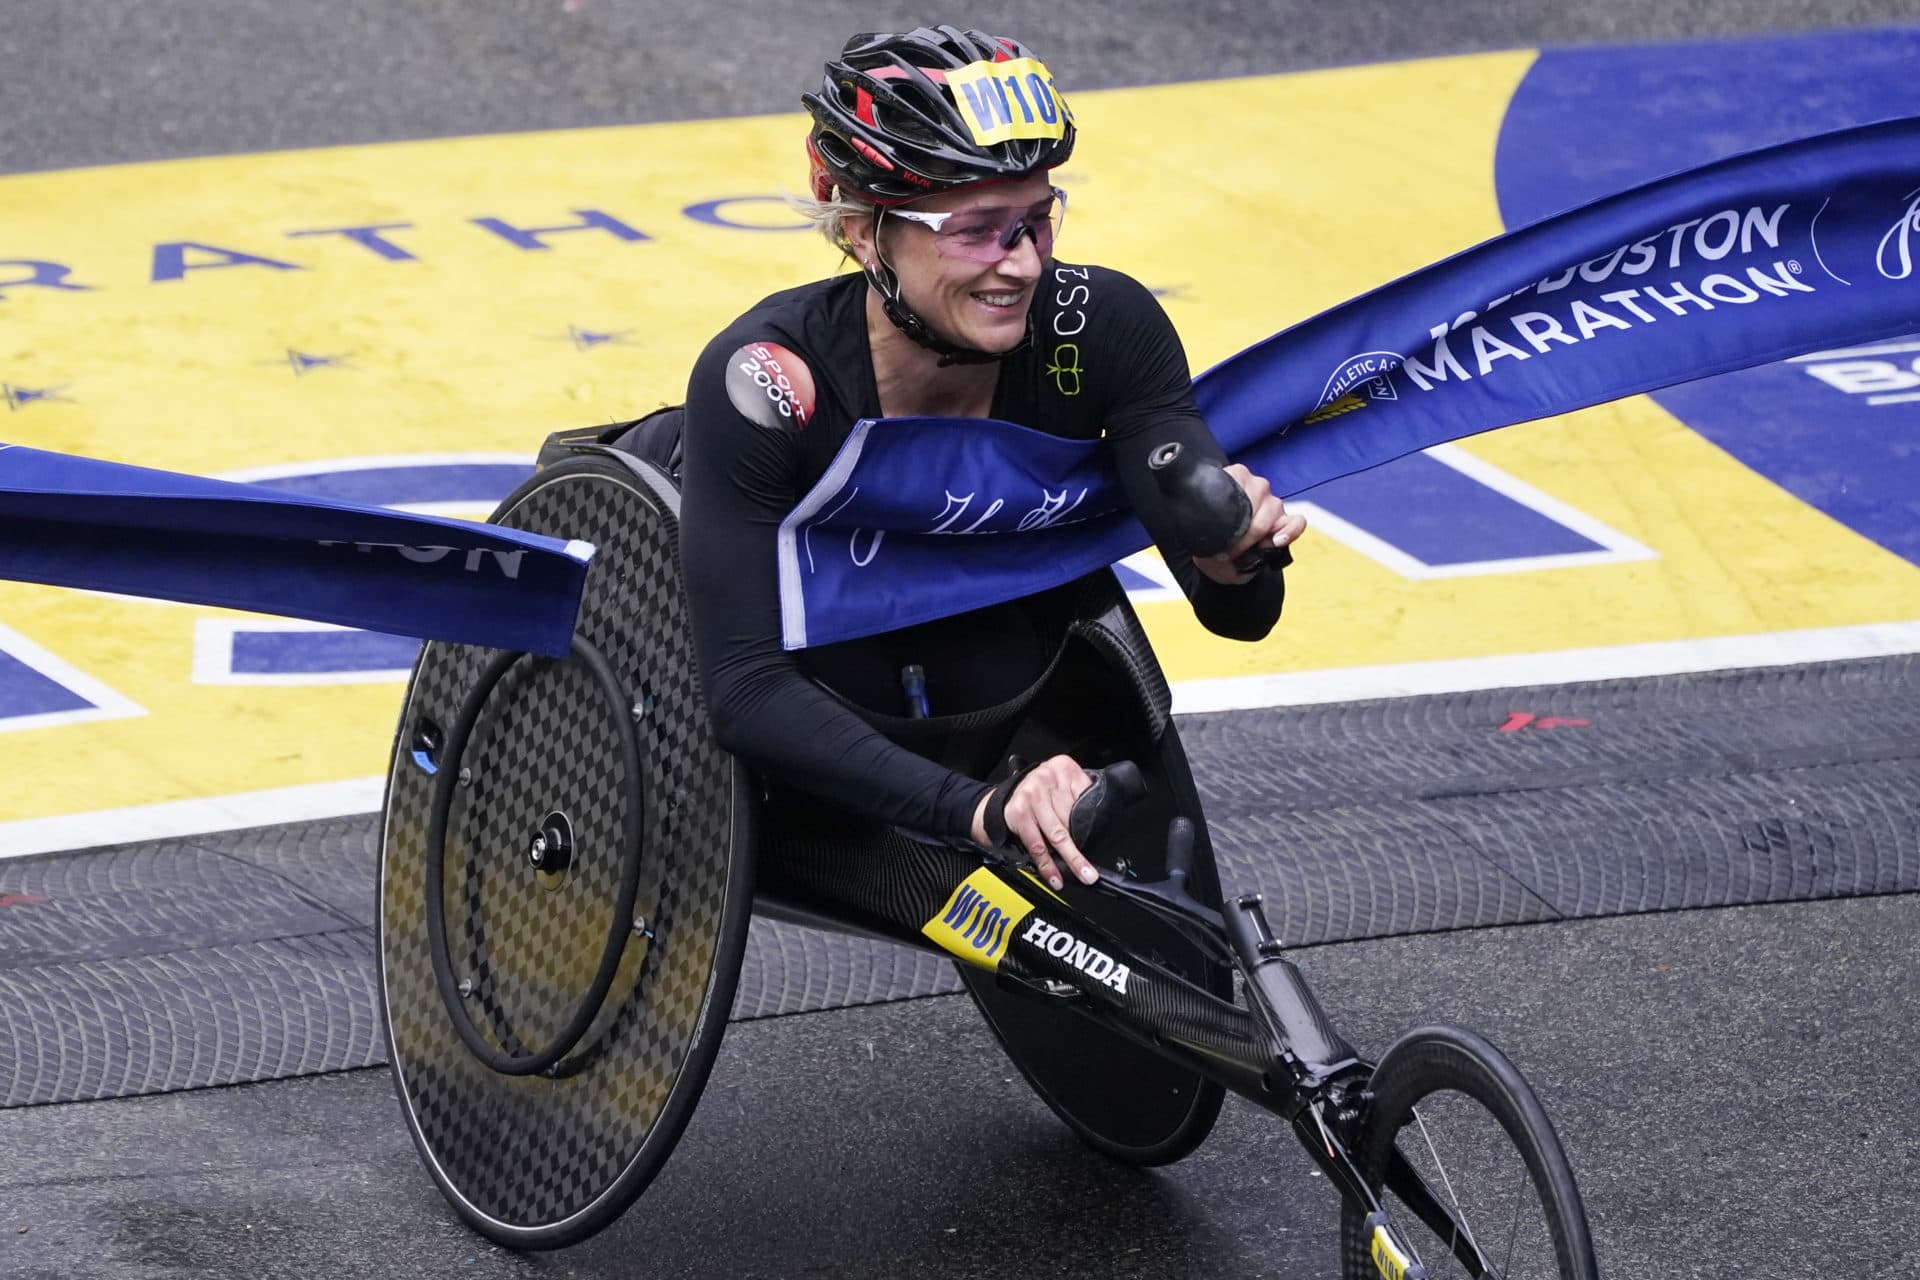 Manuela Schär, of Switzerland, smiles while breaking the finish line to win the women's wheelchair division at the Boston Marathon in Boston, Monday, Oct. 11, 2021. (Charles Krupa/AP)